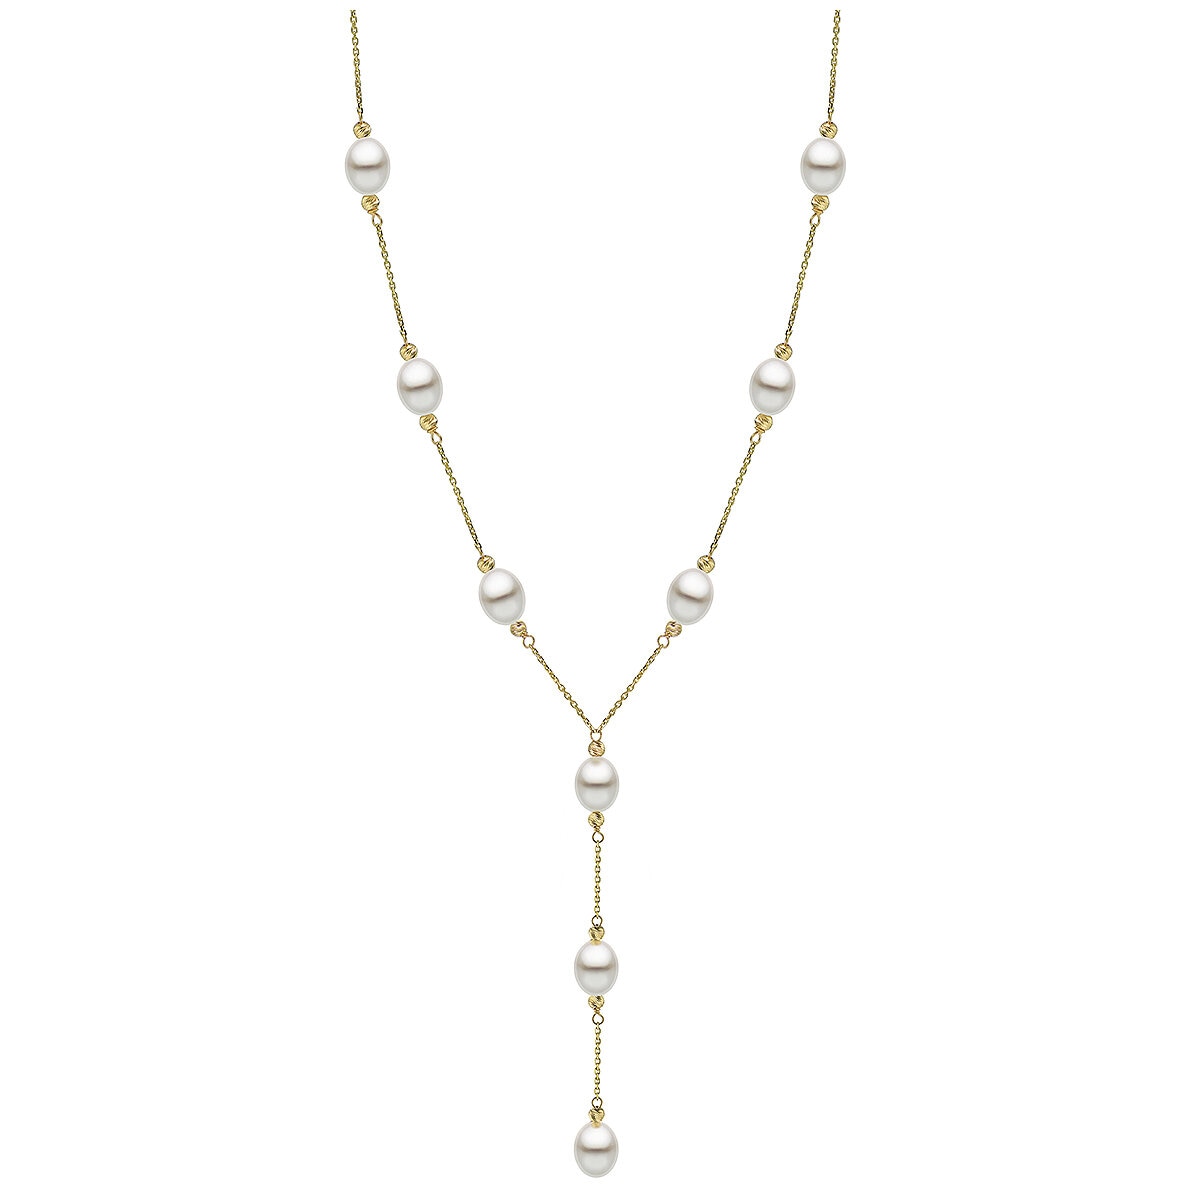 18KT Yellow Gold 8-9mm Oval Freshwater Pearl & Pyramid Beads Hanging Cable Chain Necklace